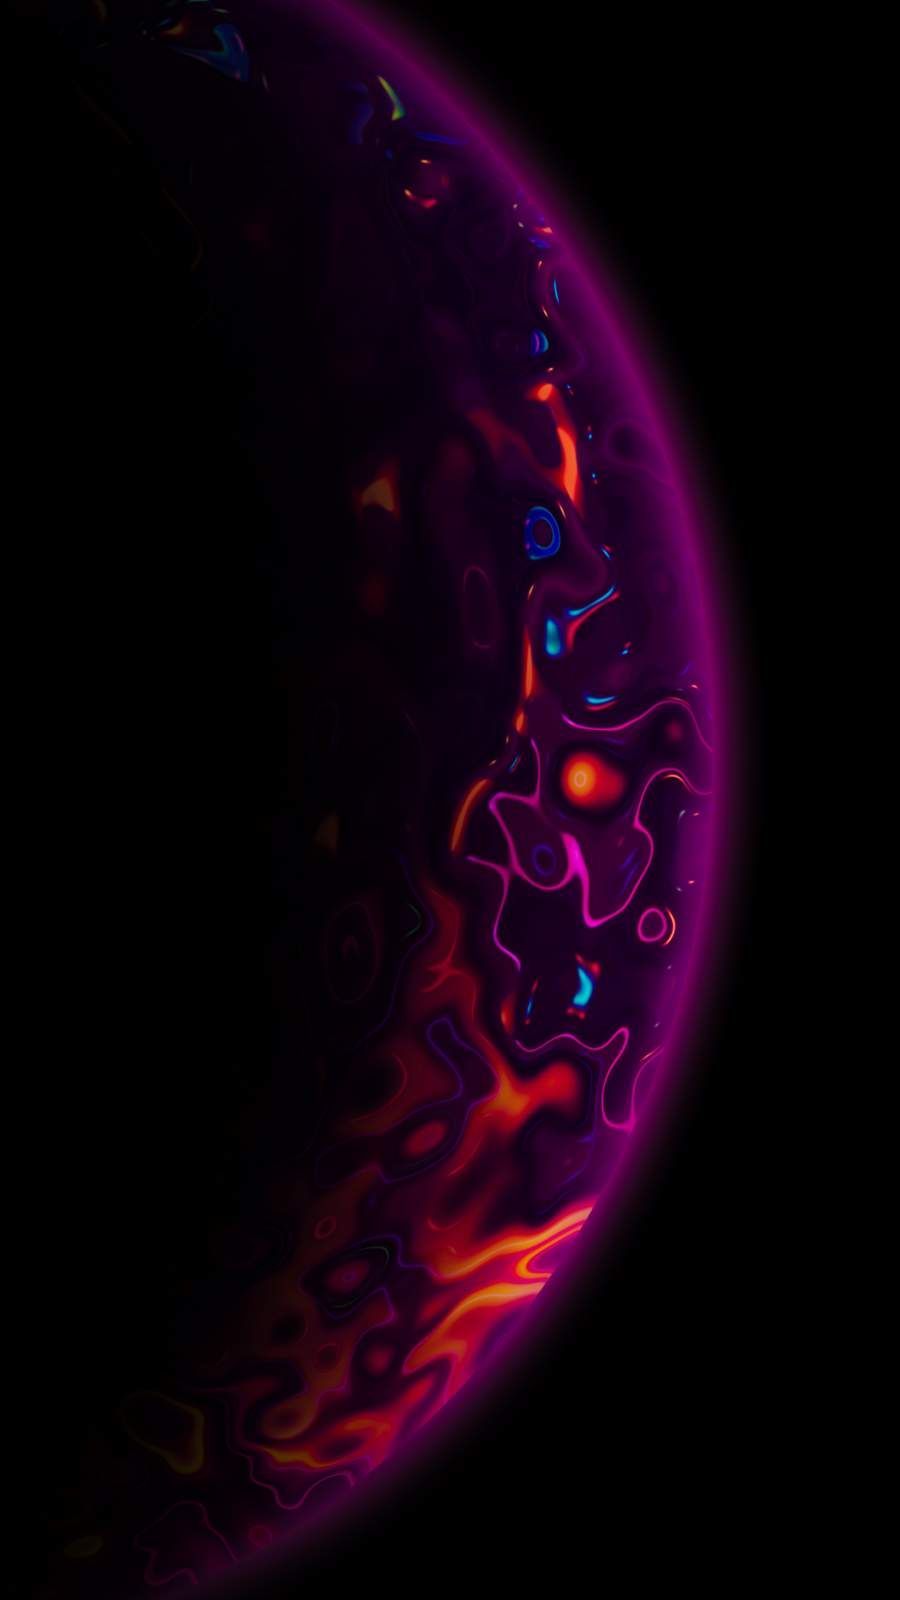 Lava Planet iPhone Wallpaper. iPhone wallpaper image, iPhone background wallpaper, Abstract iphone wallpaper